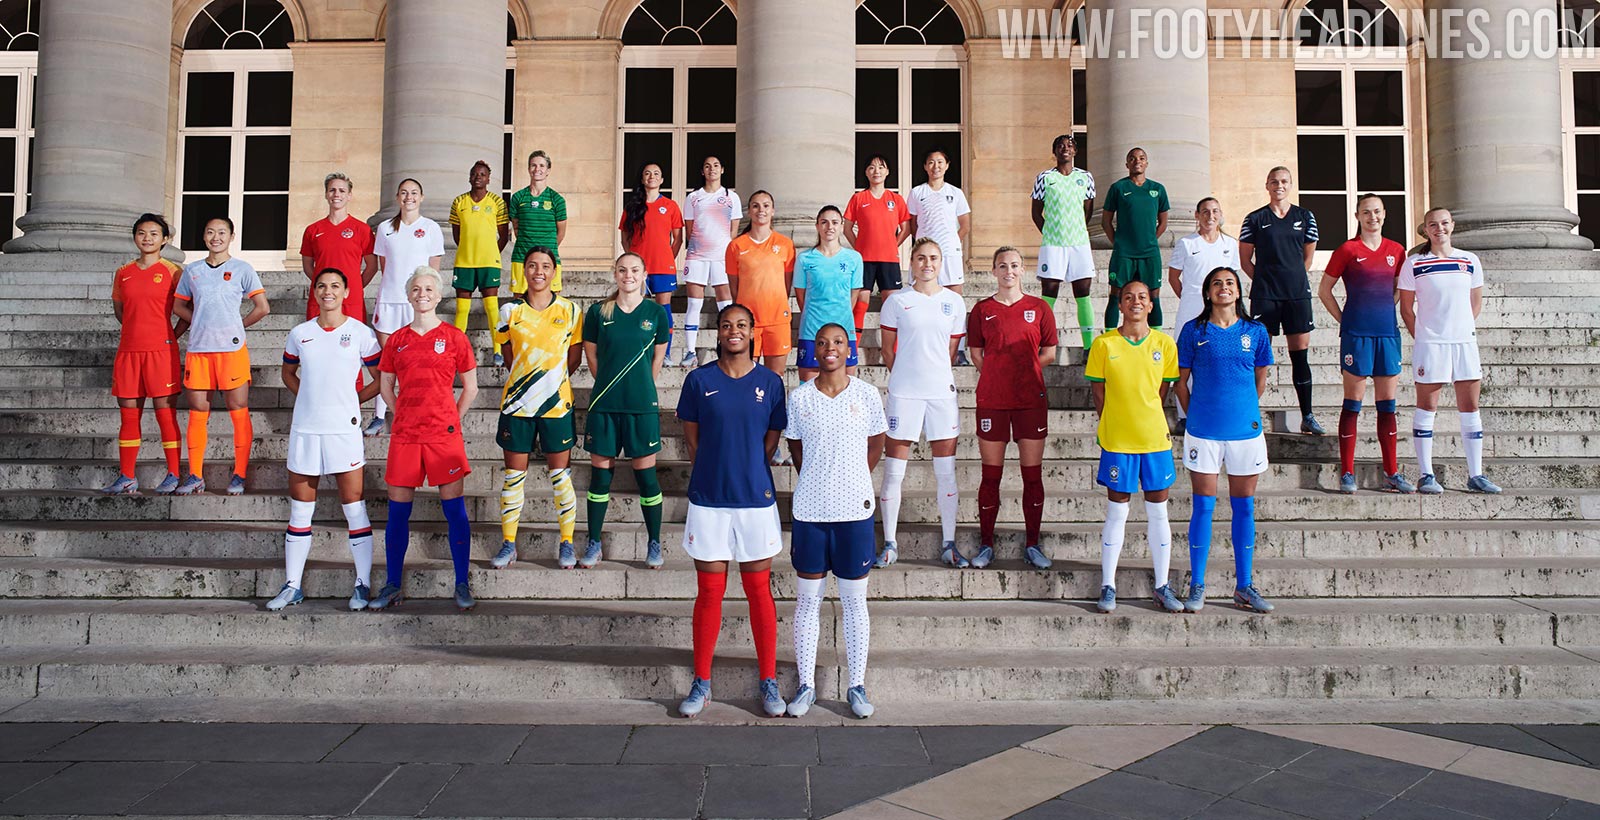 2019 FIFA Women's World Cup Kit Overview Unique Kits From Adidas